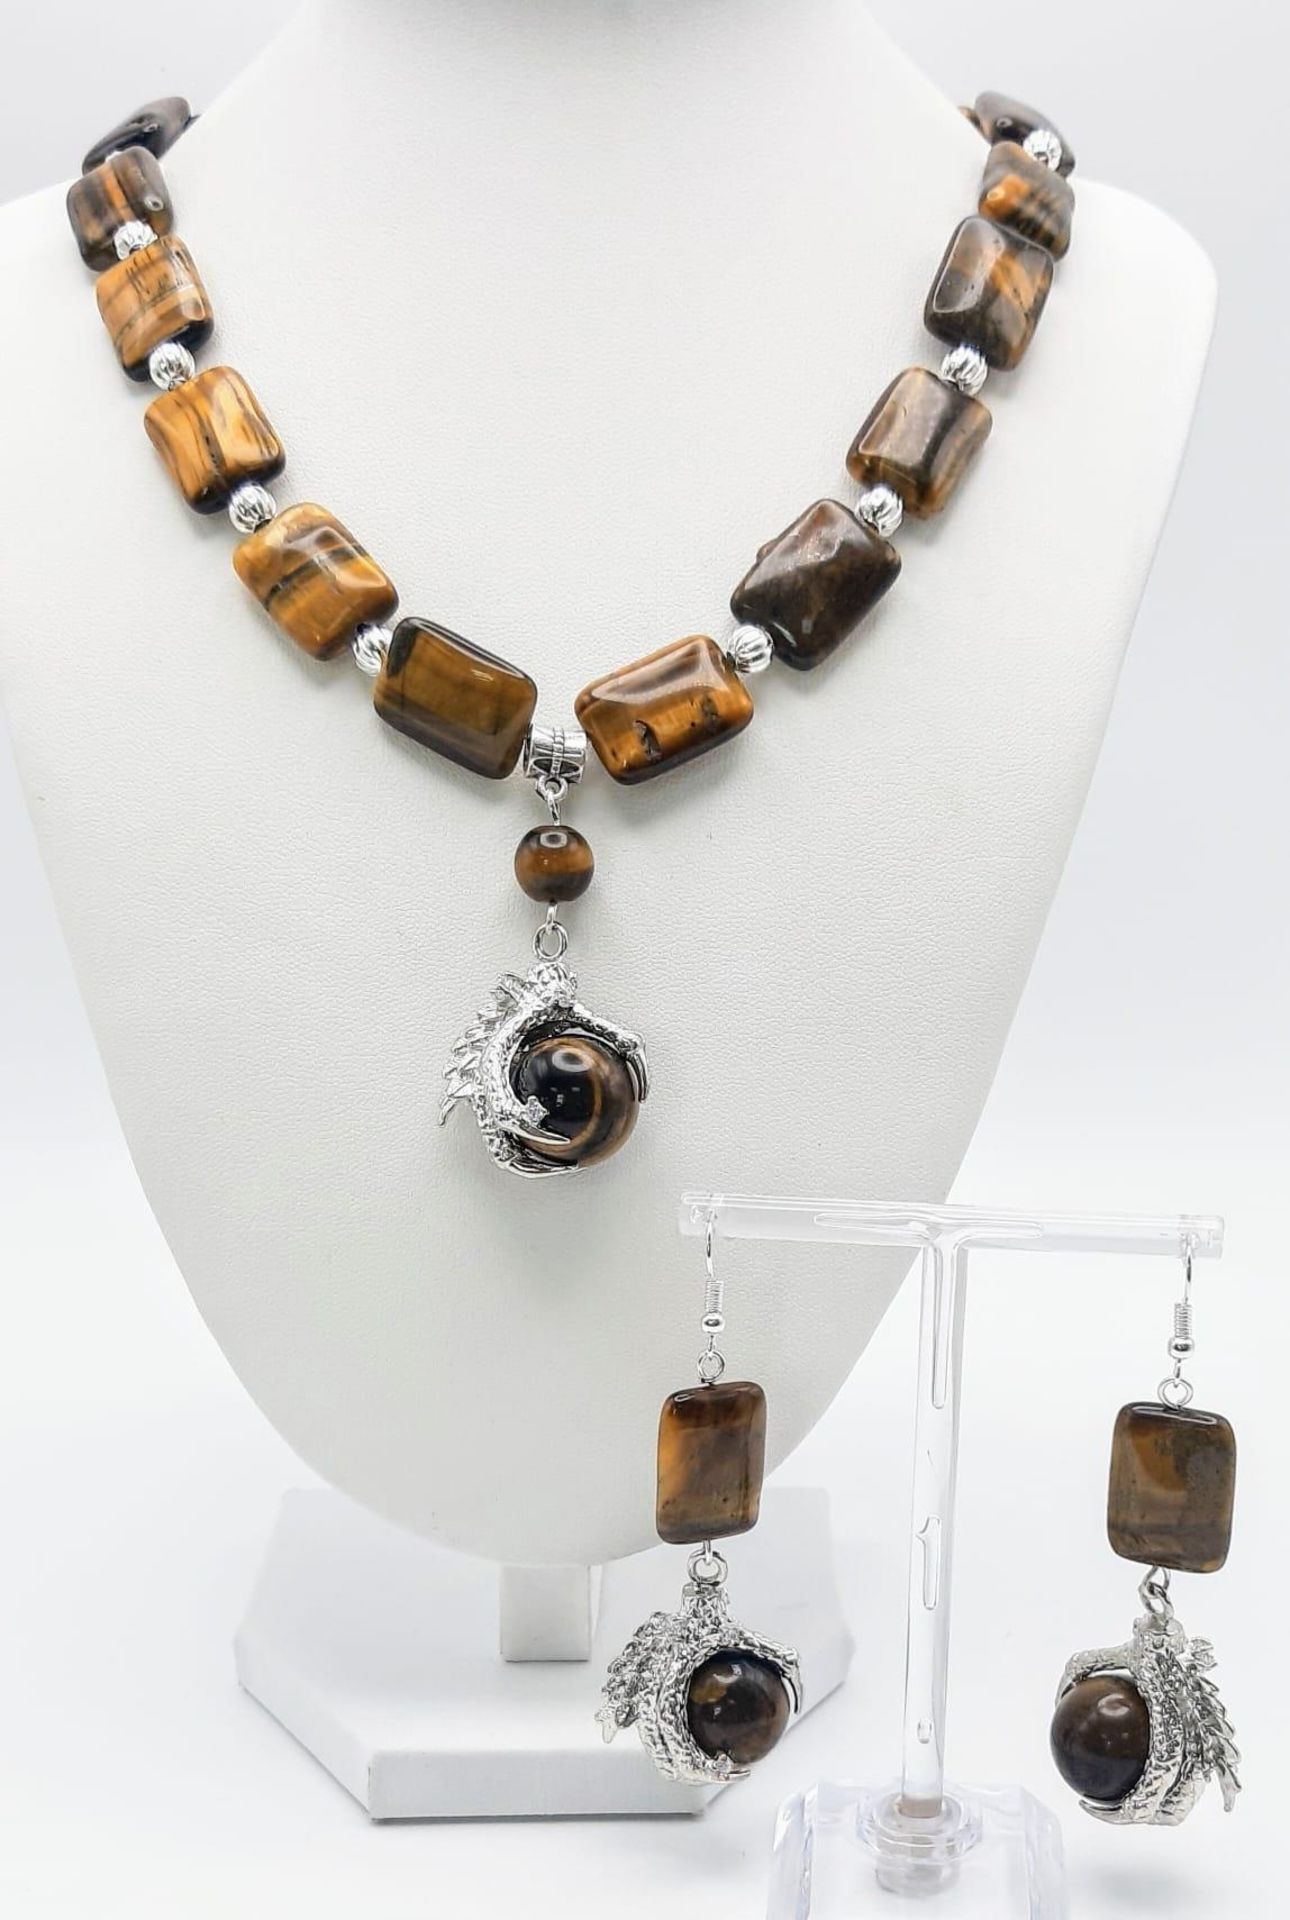 A substantial tiger’s eye necklace and earrings set with eagle claw pendants, beads 20 x 15 x 7